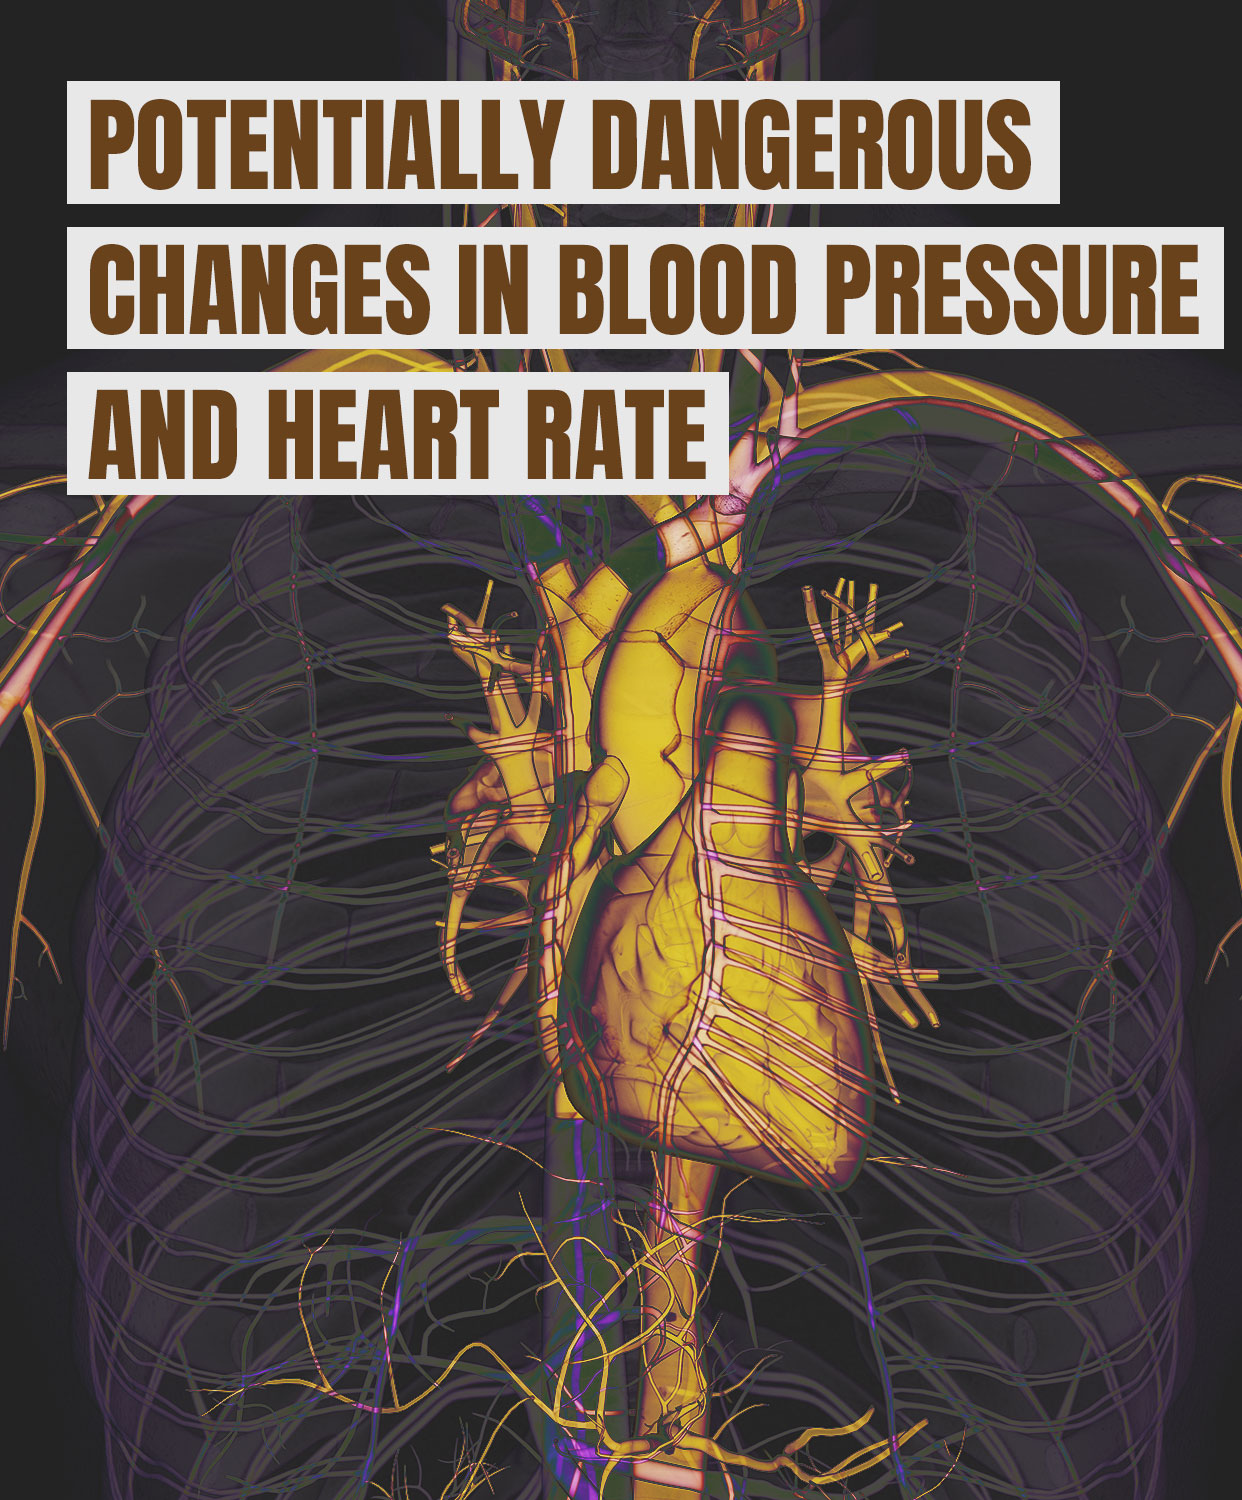 Potentially dangerous changes in blood pressure and heart rate